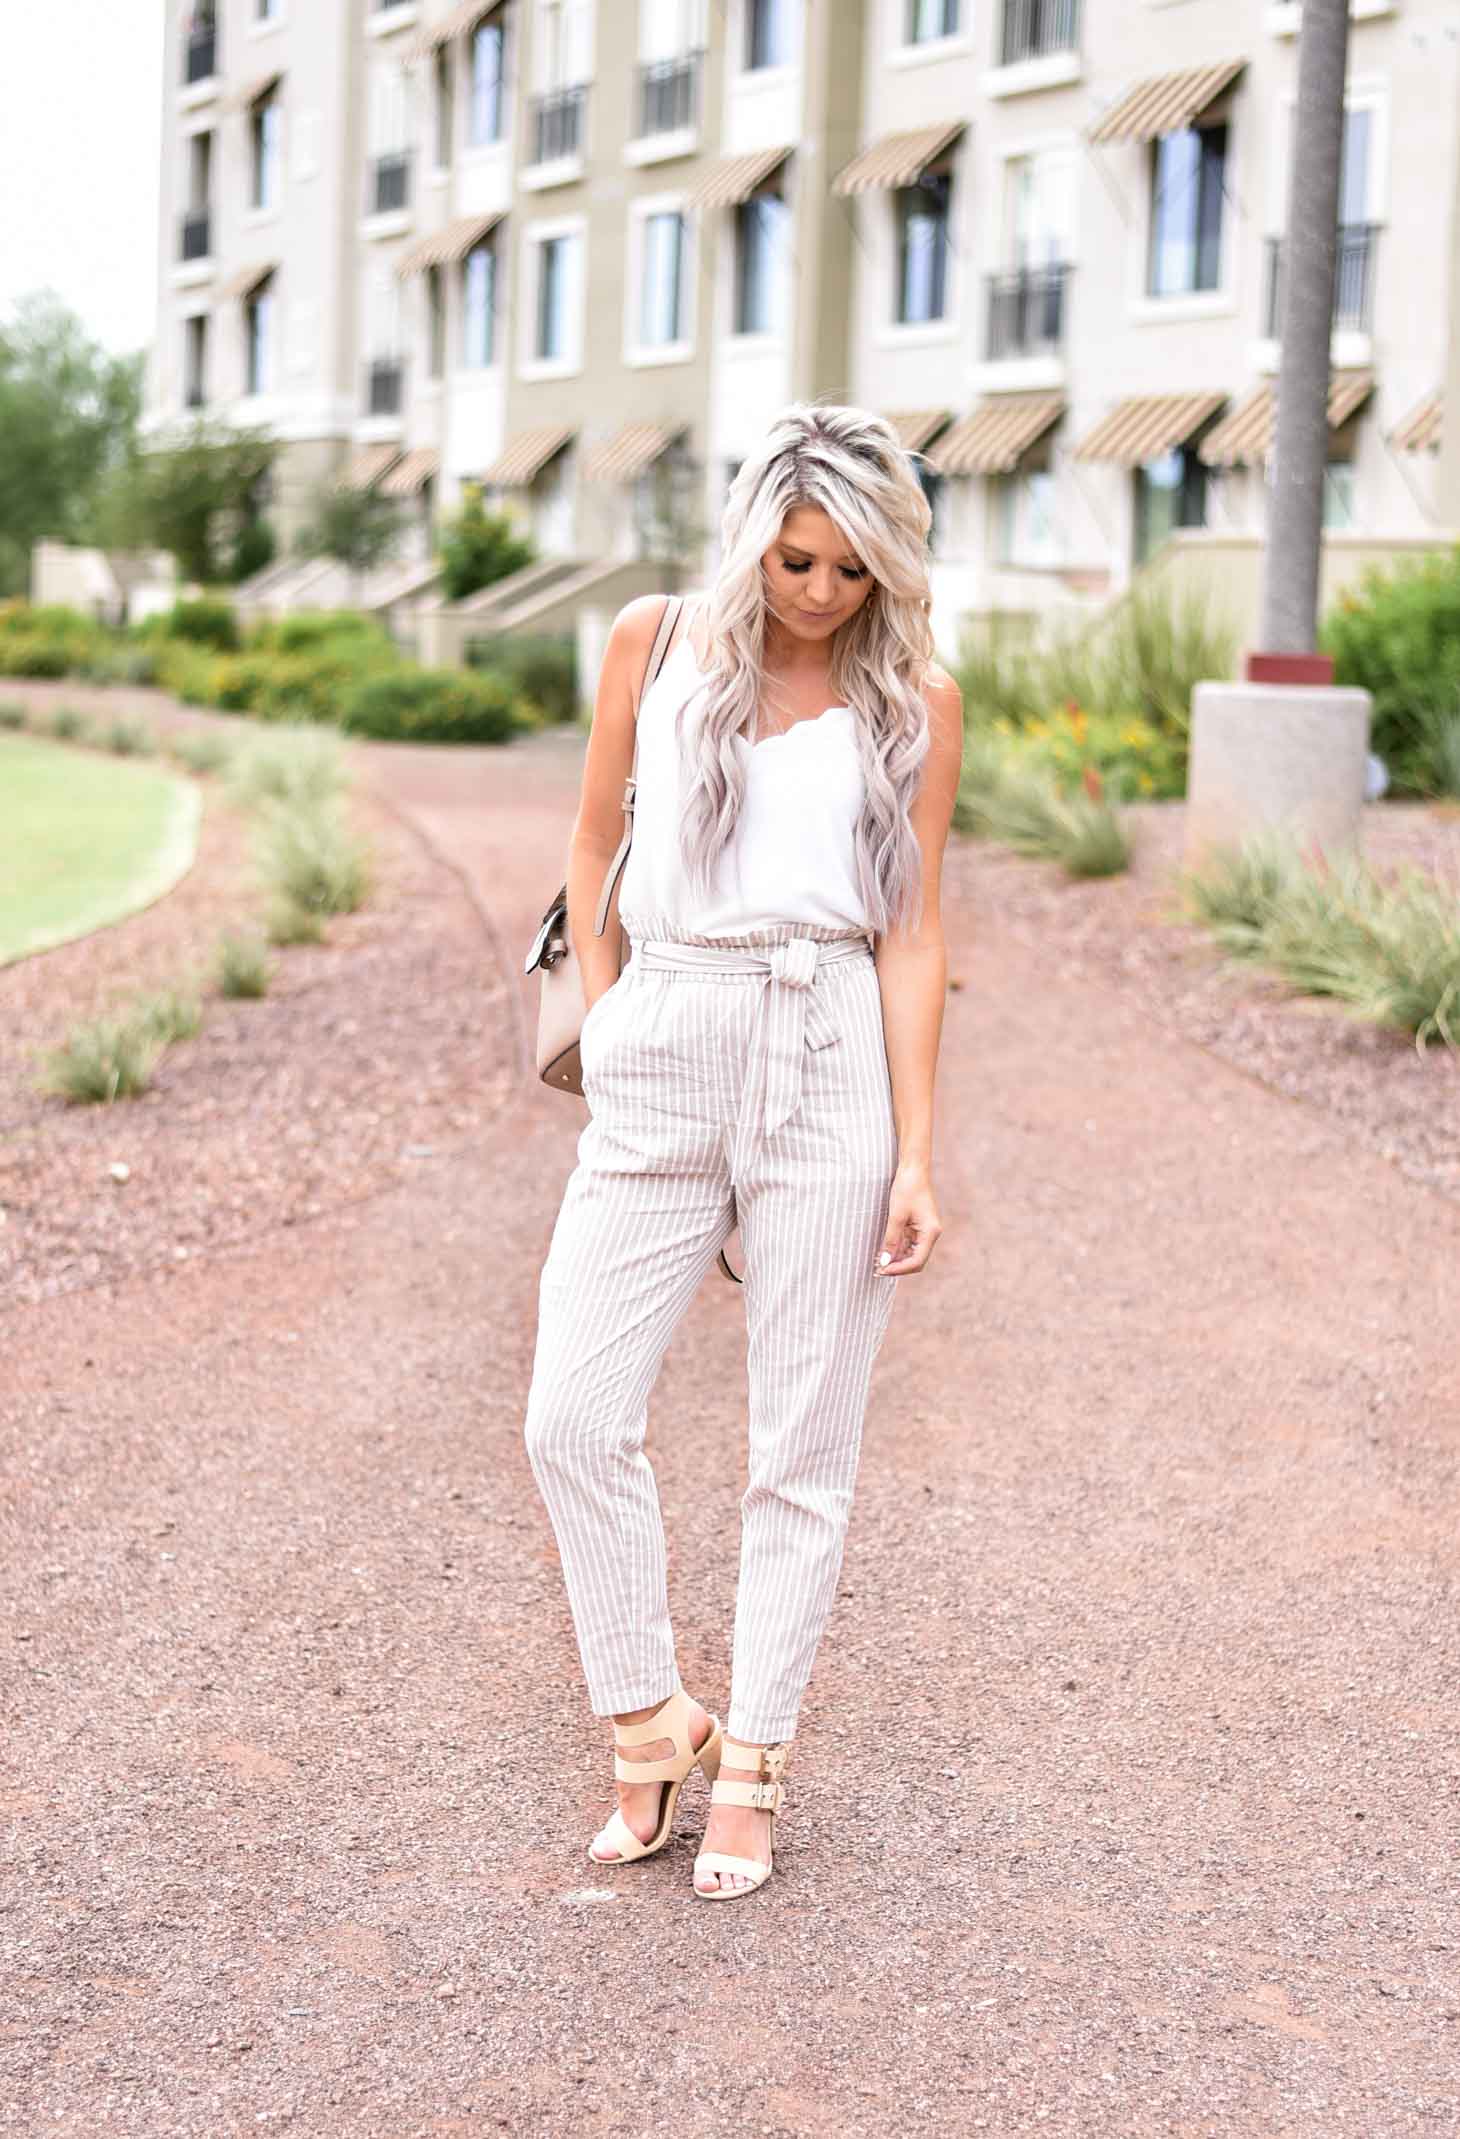 Erin Elizabeth of Wink and a Twirl shares this Red Dress Boutique look with the cutest highwaist pants ad white cami